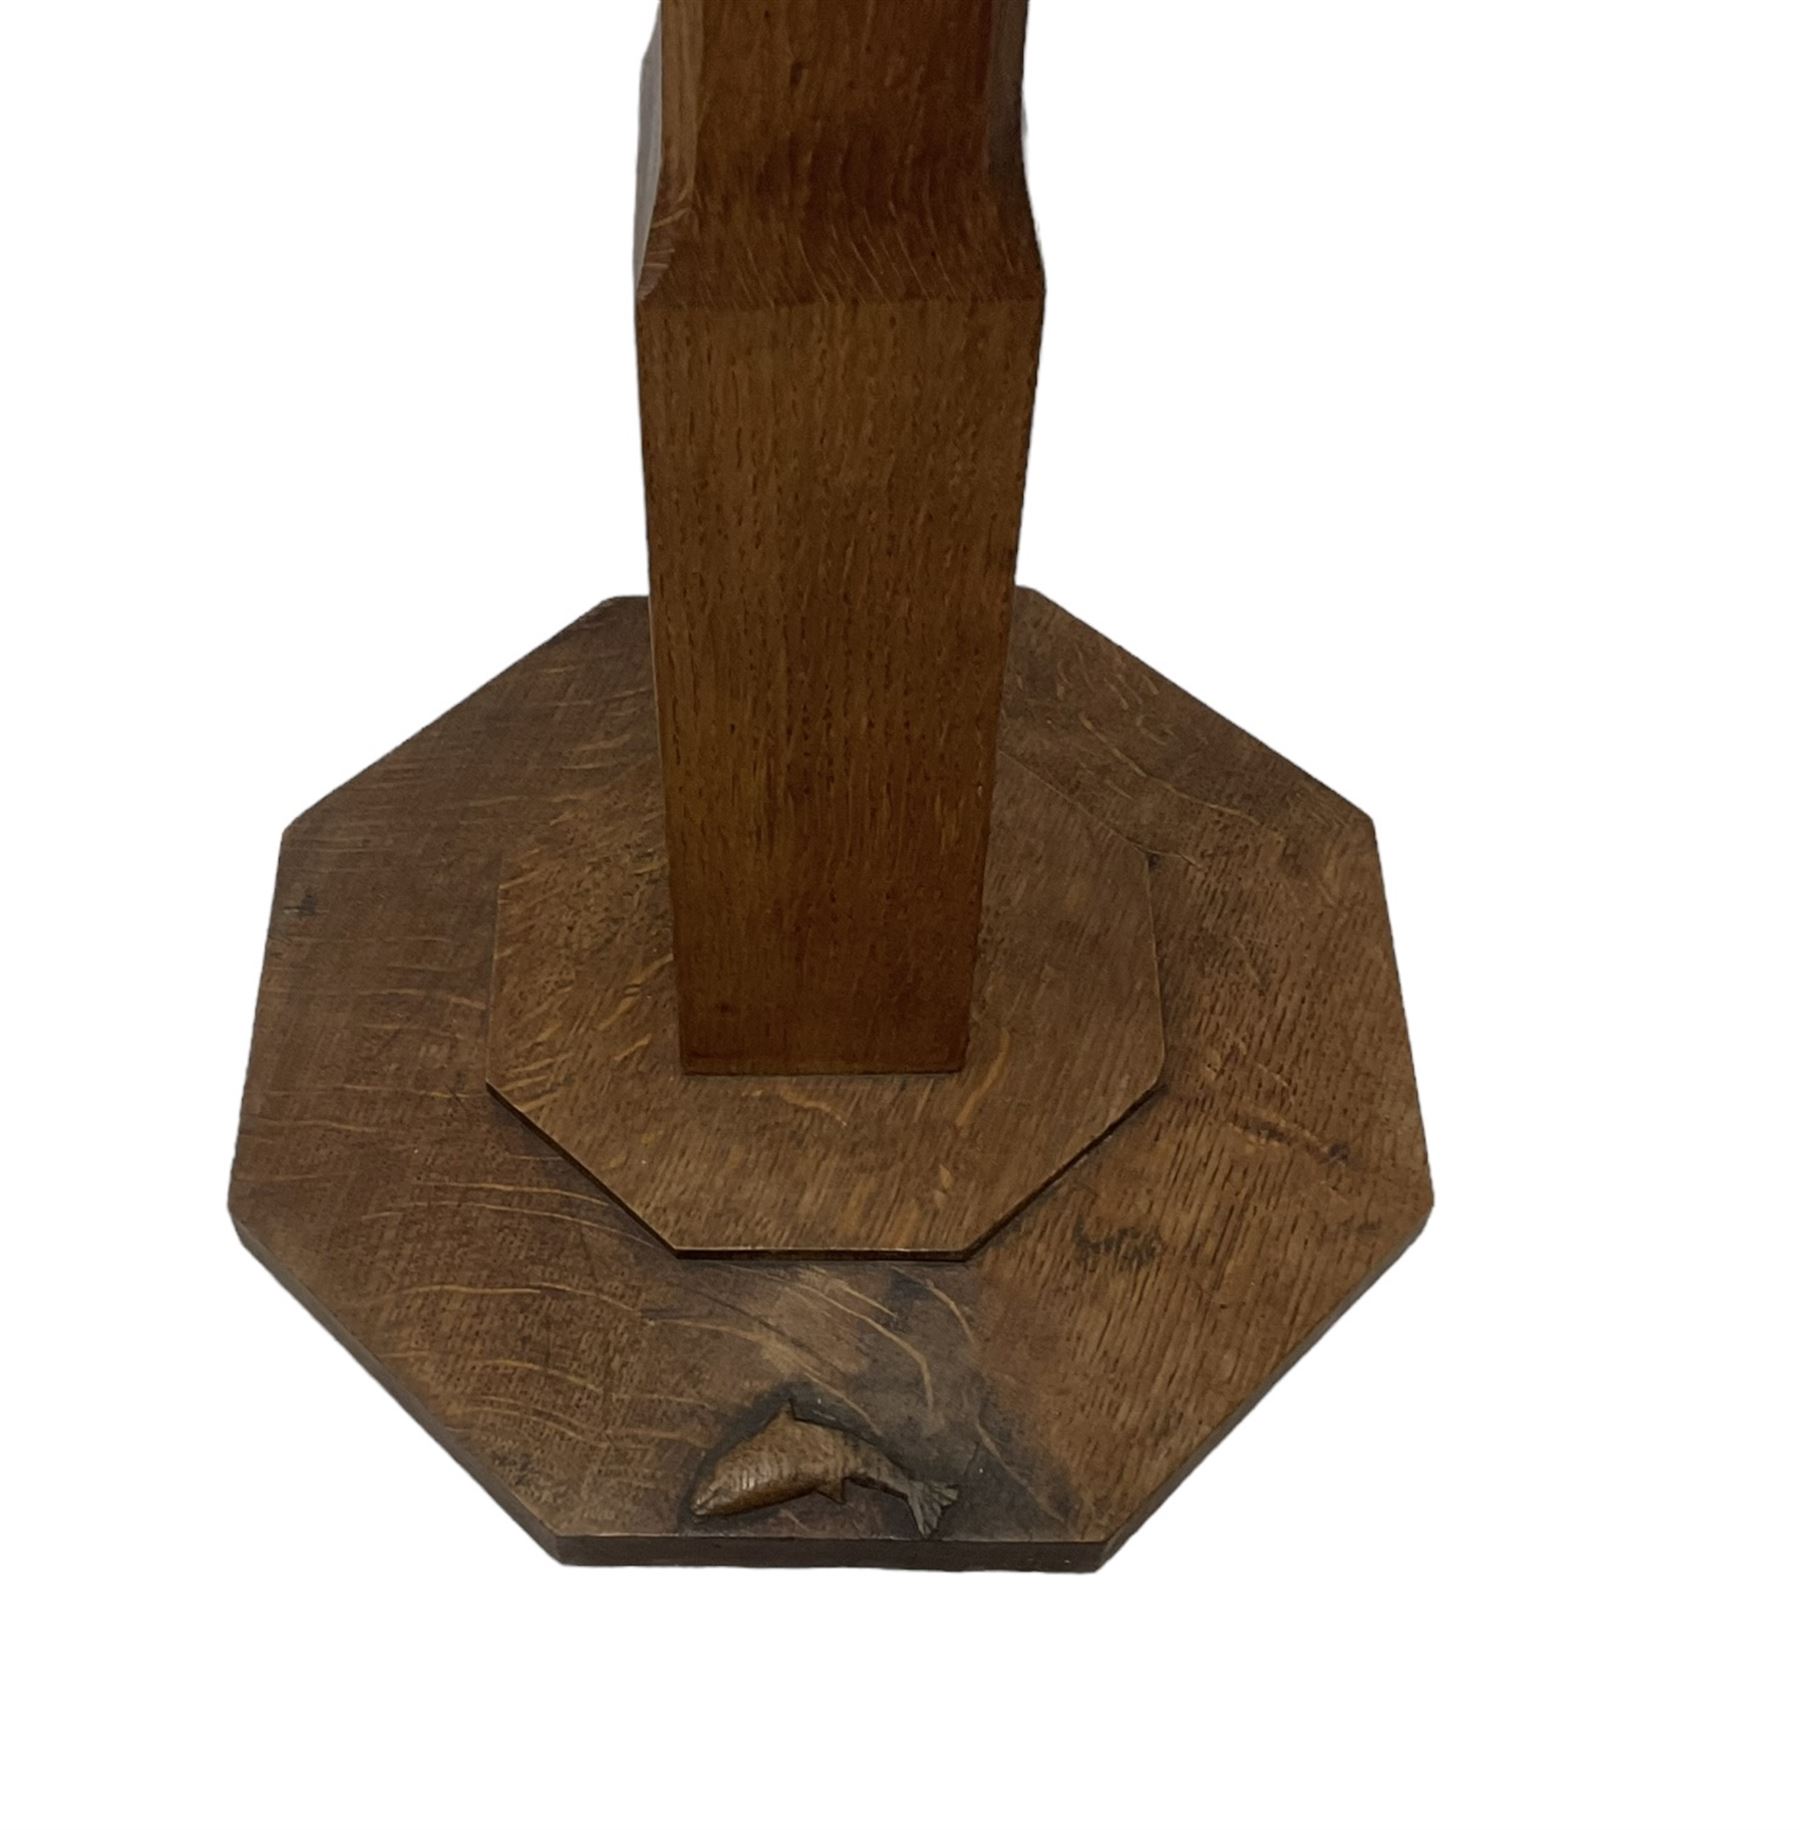 Dolphinman - oak stand with octagonal top and base - Image 3 of 7